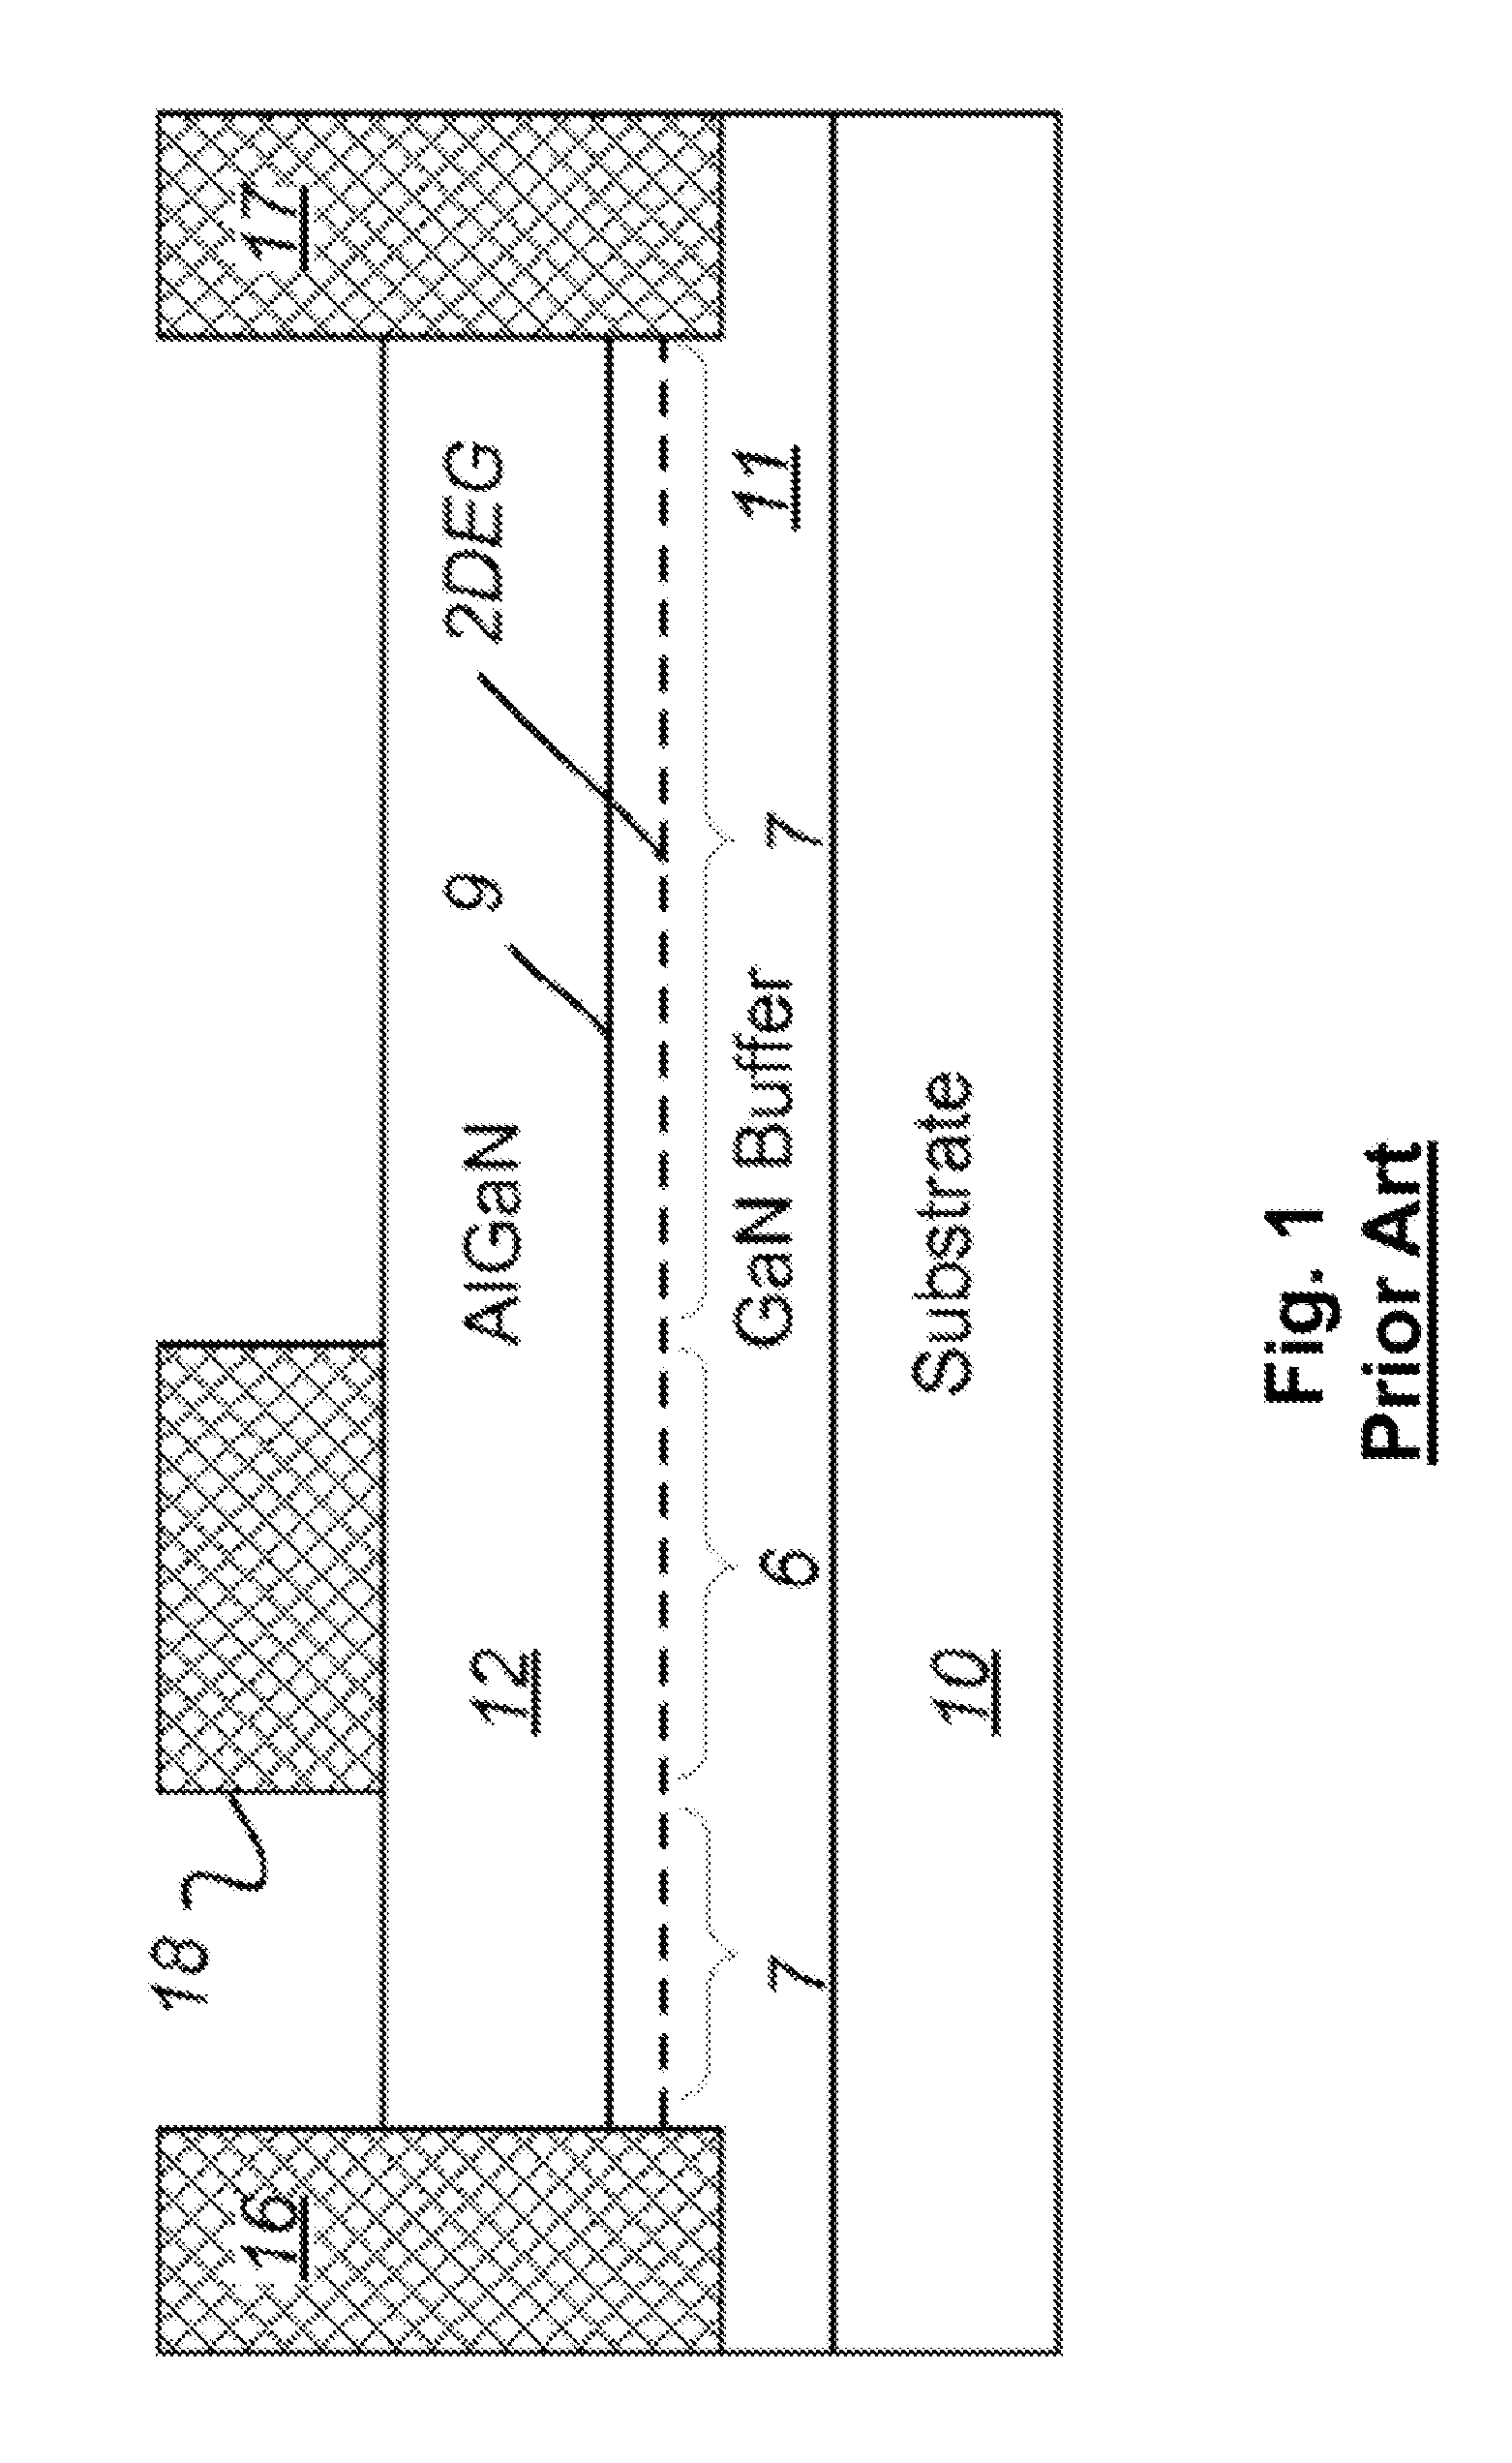 High electron mobility transistor with multiple channels